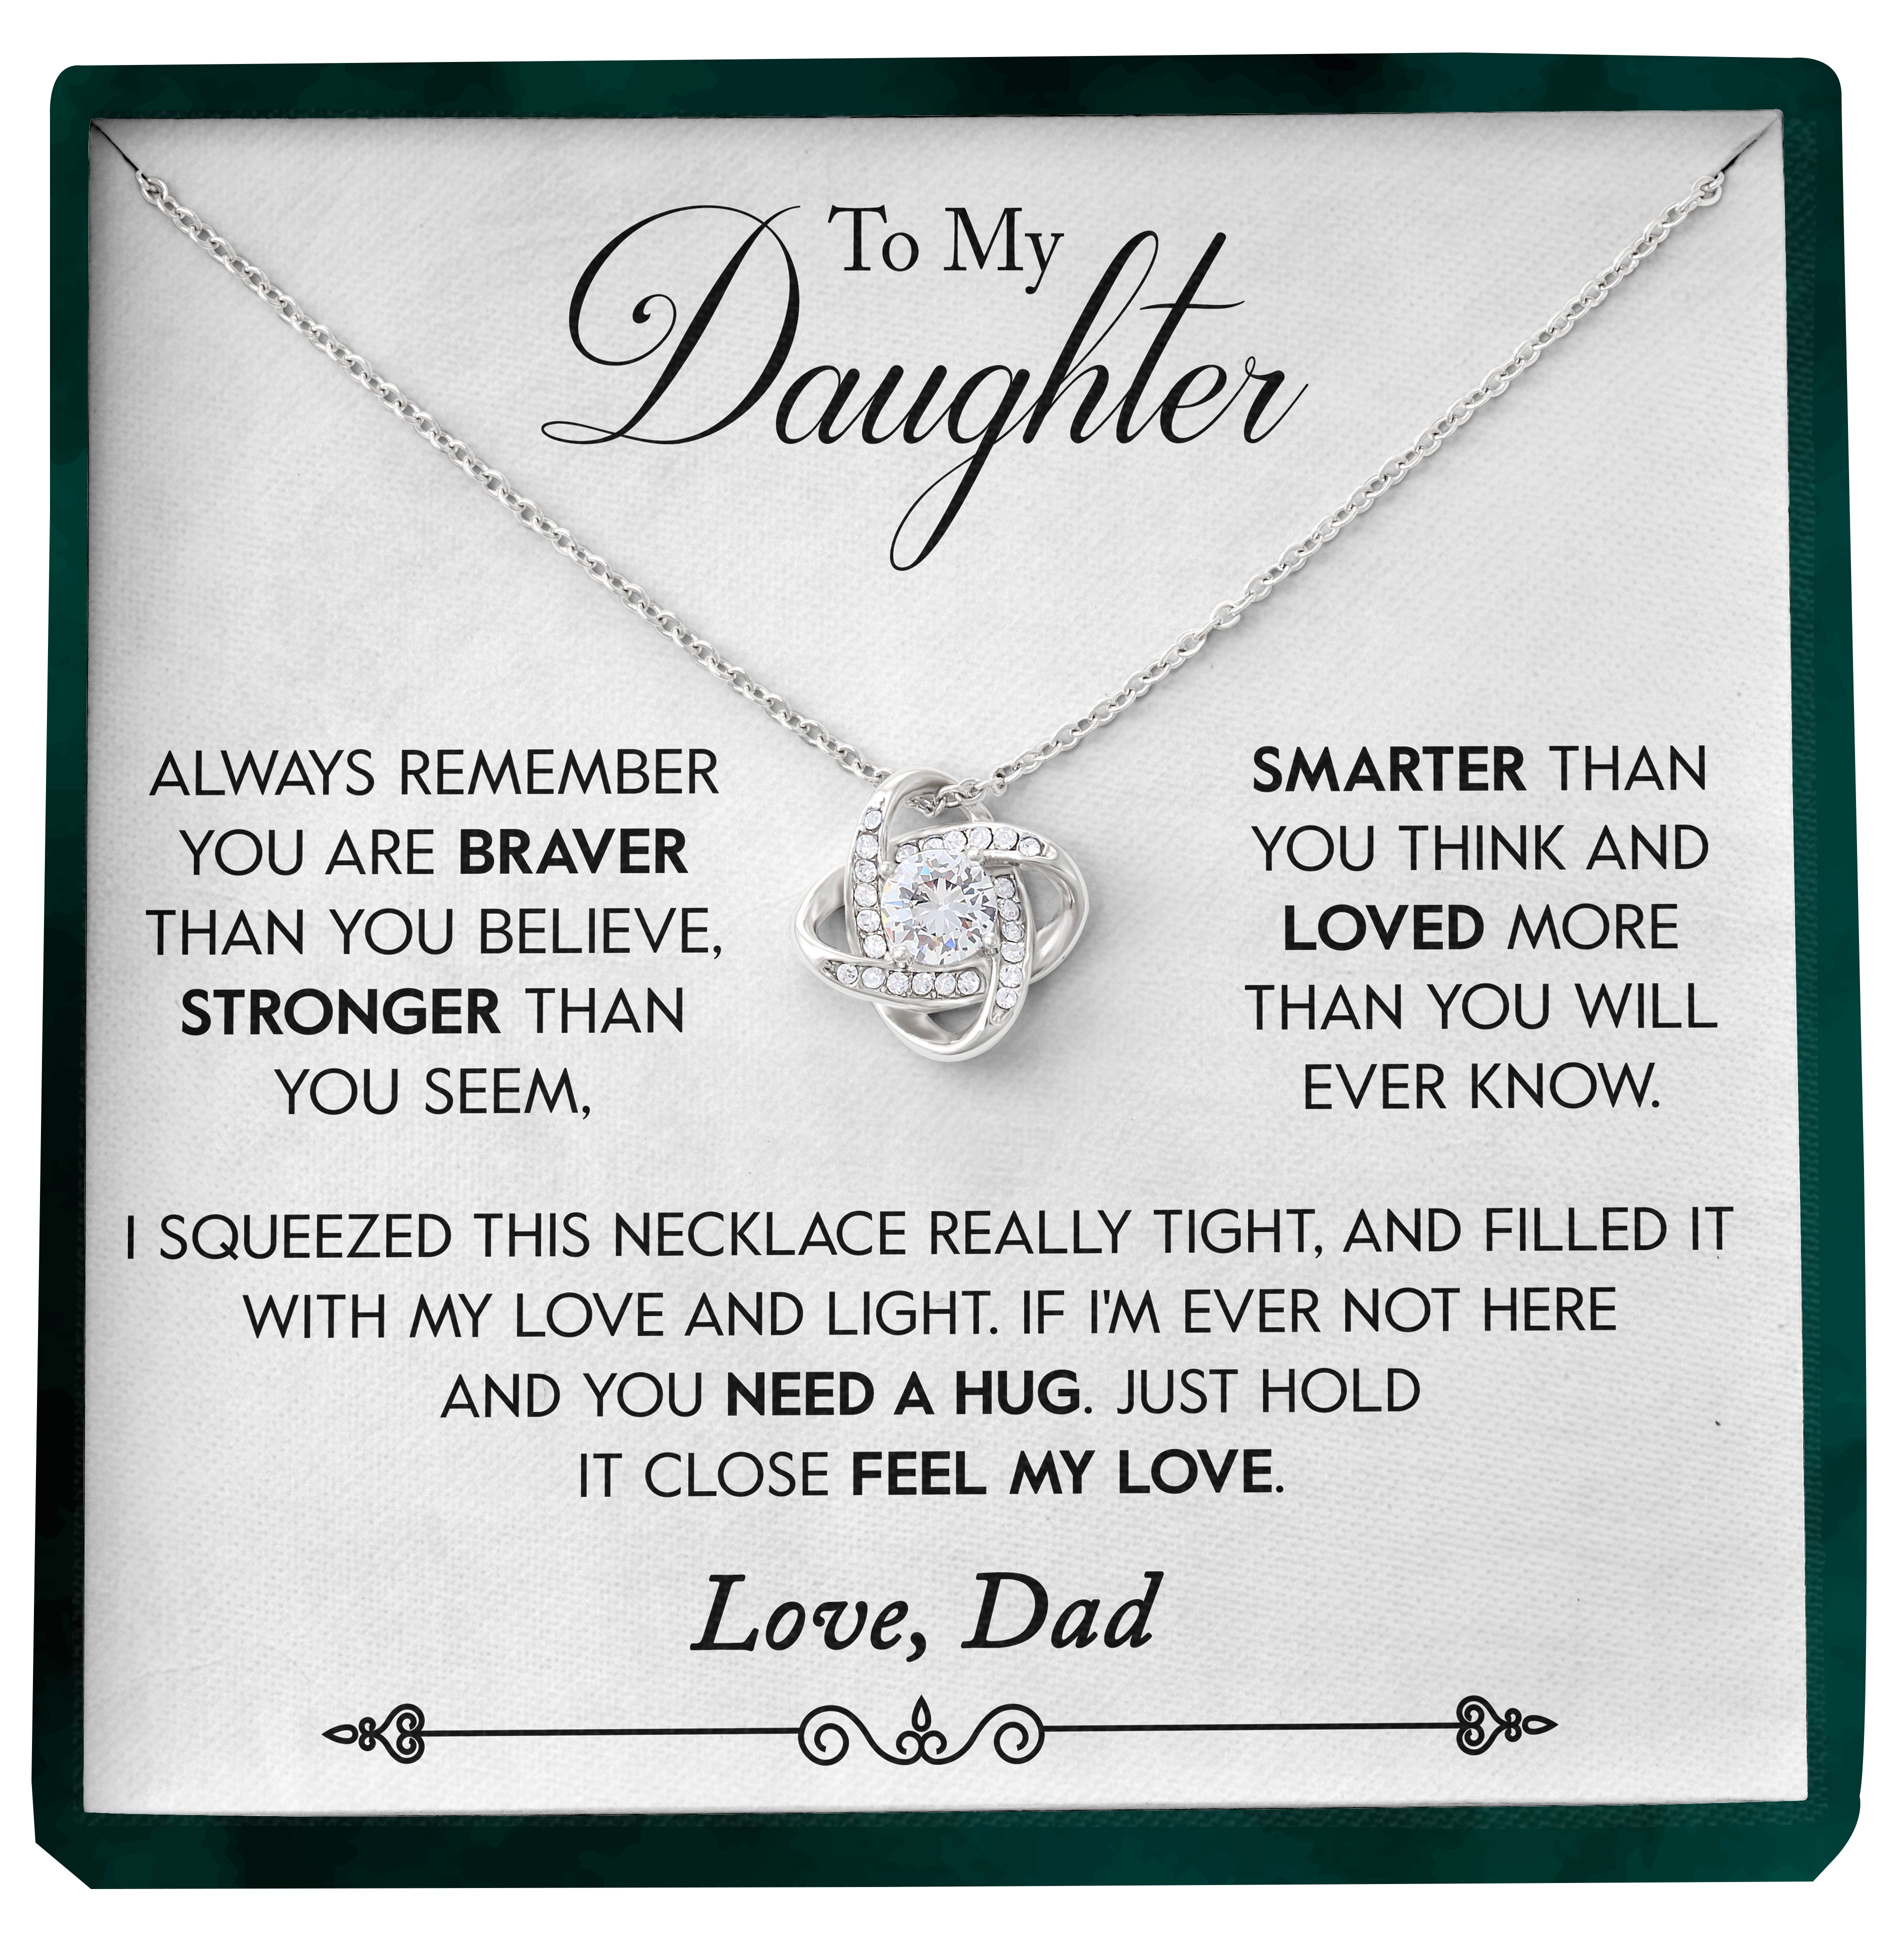 To My Daughter | "Feel My Love" | Love Knot Necklace